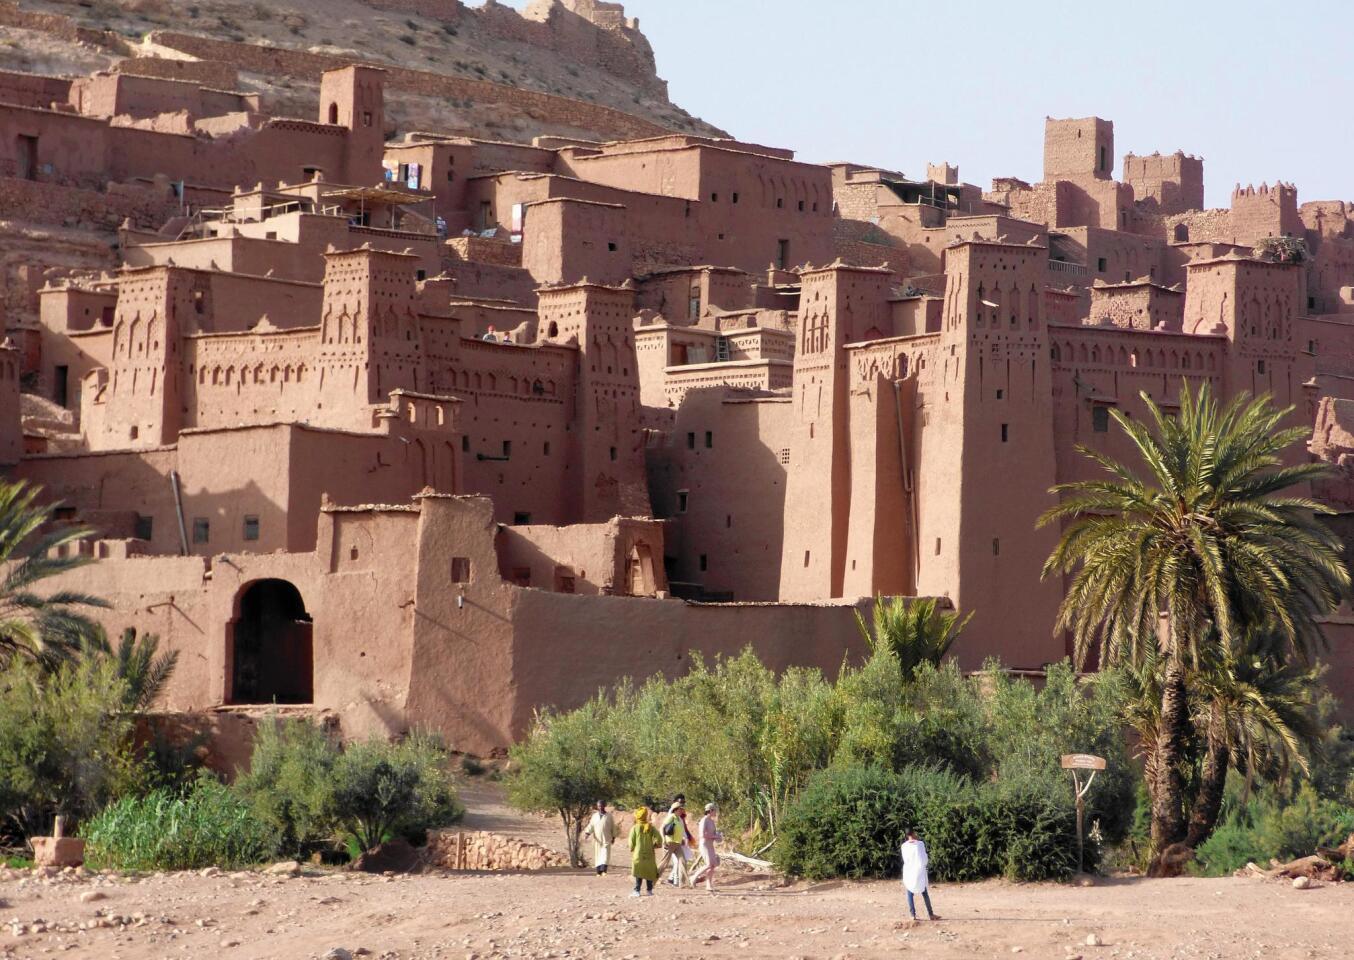 The fortress Ait-Ben-Haddou was a stopping point along the ancient caravan routes, but it’s also been the site of many film scenes.